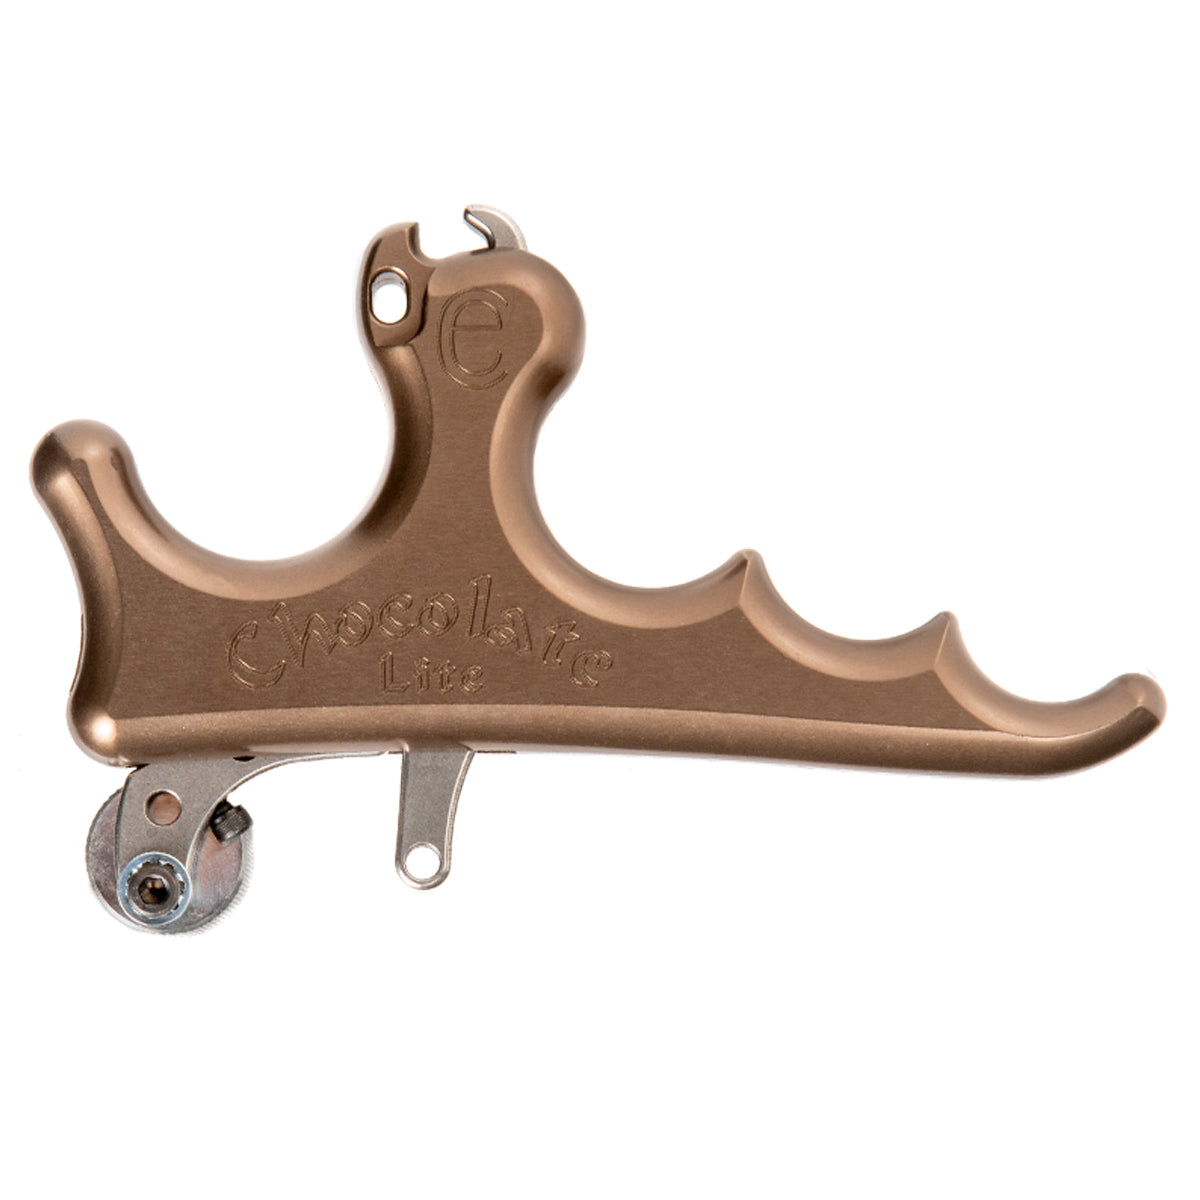 Carter Chocolate Lite 4 Finger Release in  by GOHUNT | Carter Releases - GOHUNT Shop